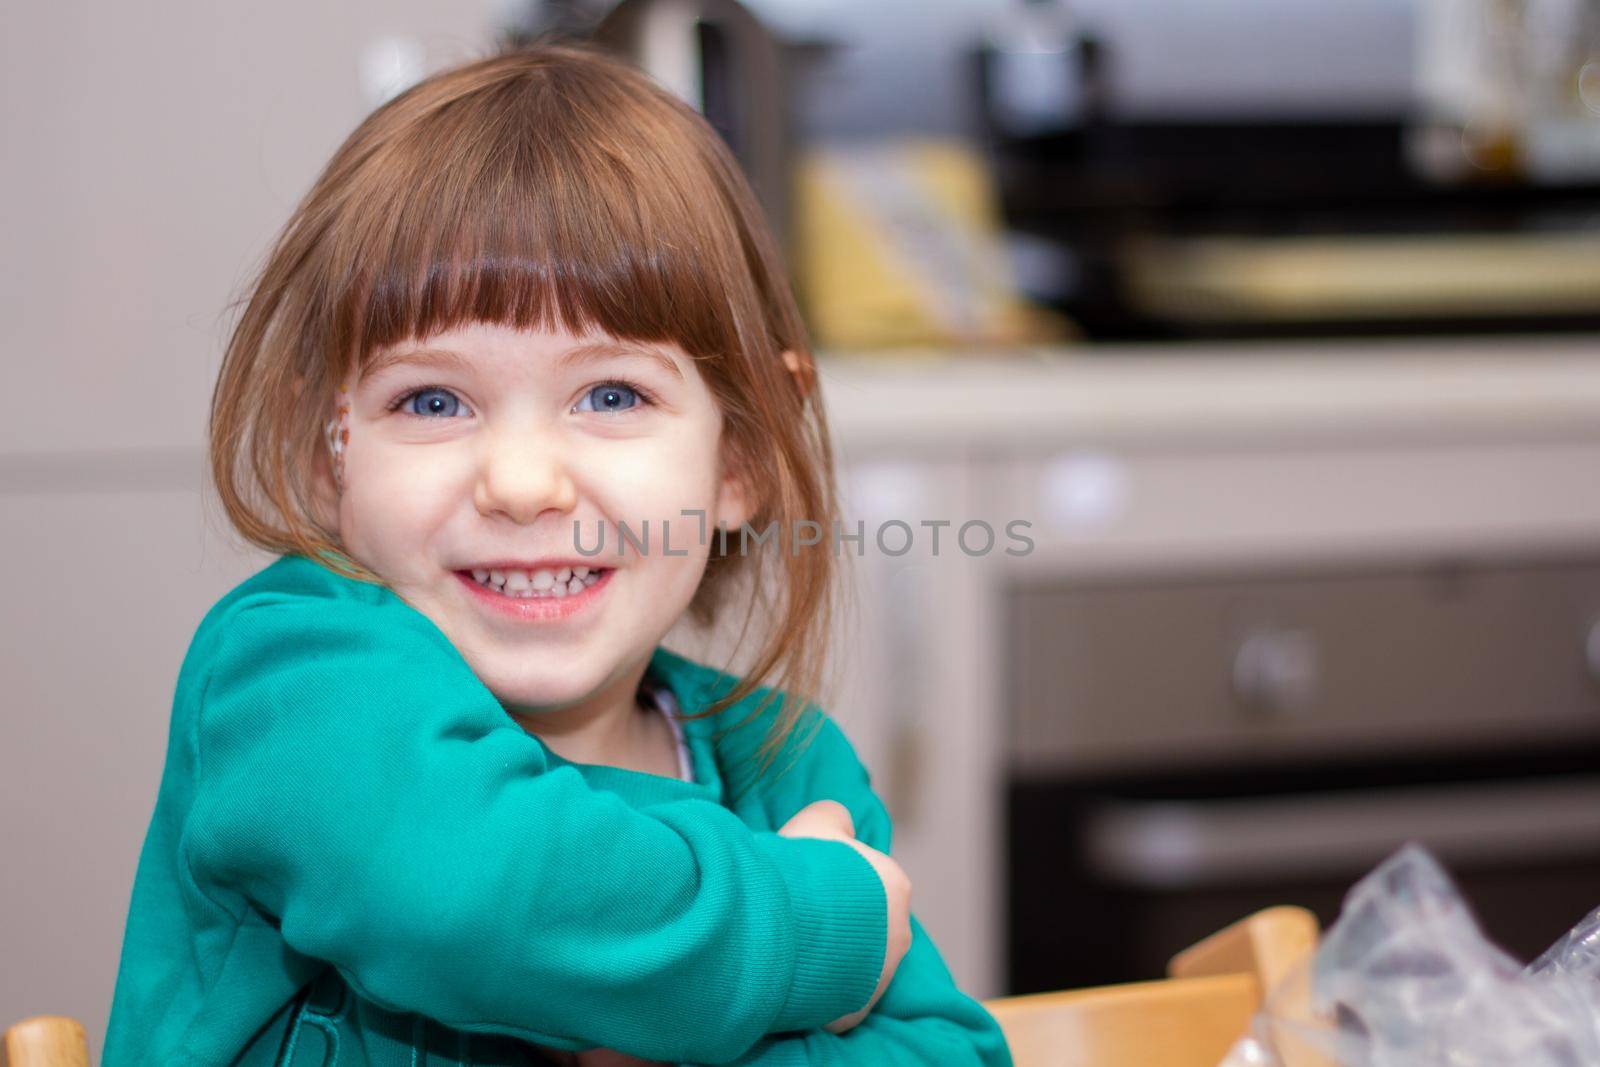 Portrait of a cute, brown-haired, blue-eyed, baby girl in green sweater in a kitchen